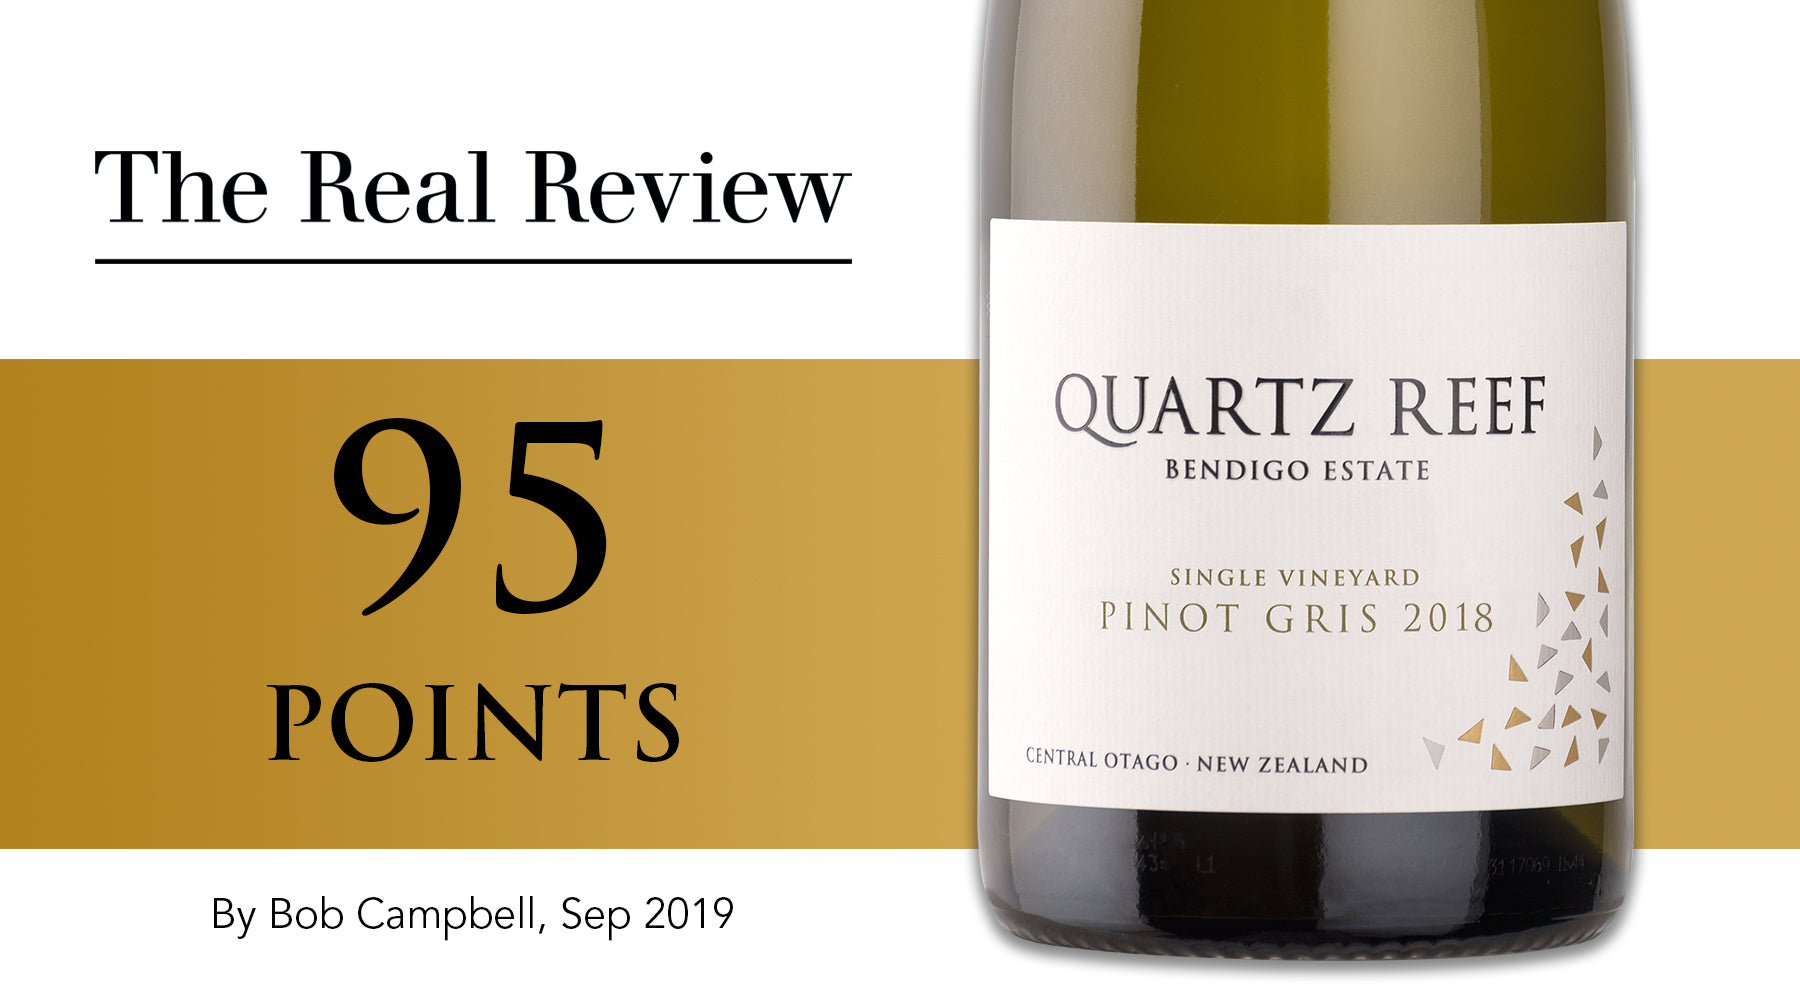 Pinot Gris 2018 - Awarded 95 Points